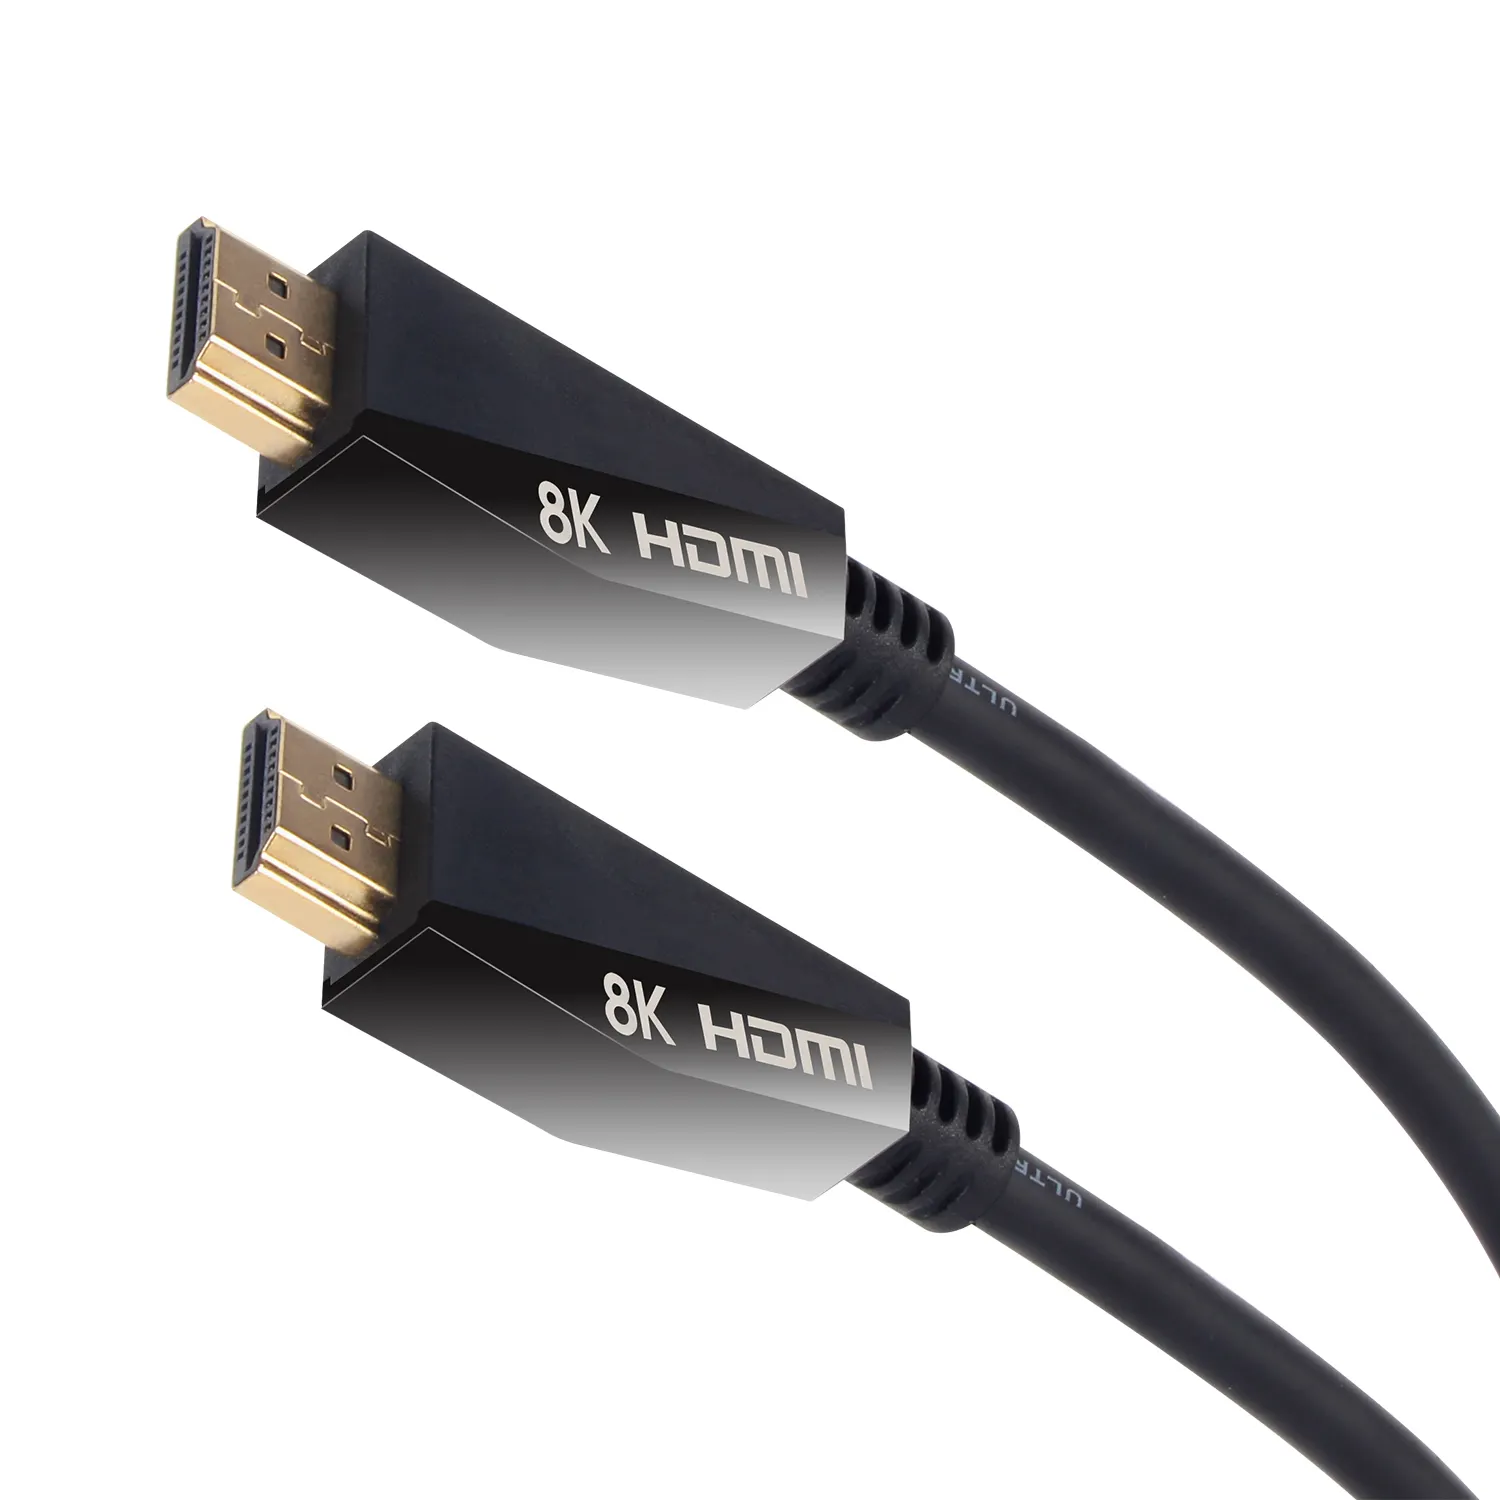 VCOM Certified 8K HDMI 2.1 Cable Version High Speed 48Gbps HDMI Cable 4K 8K 60Hz 120Hz Resolution Gold Plated Connector